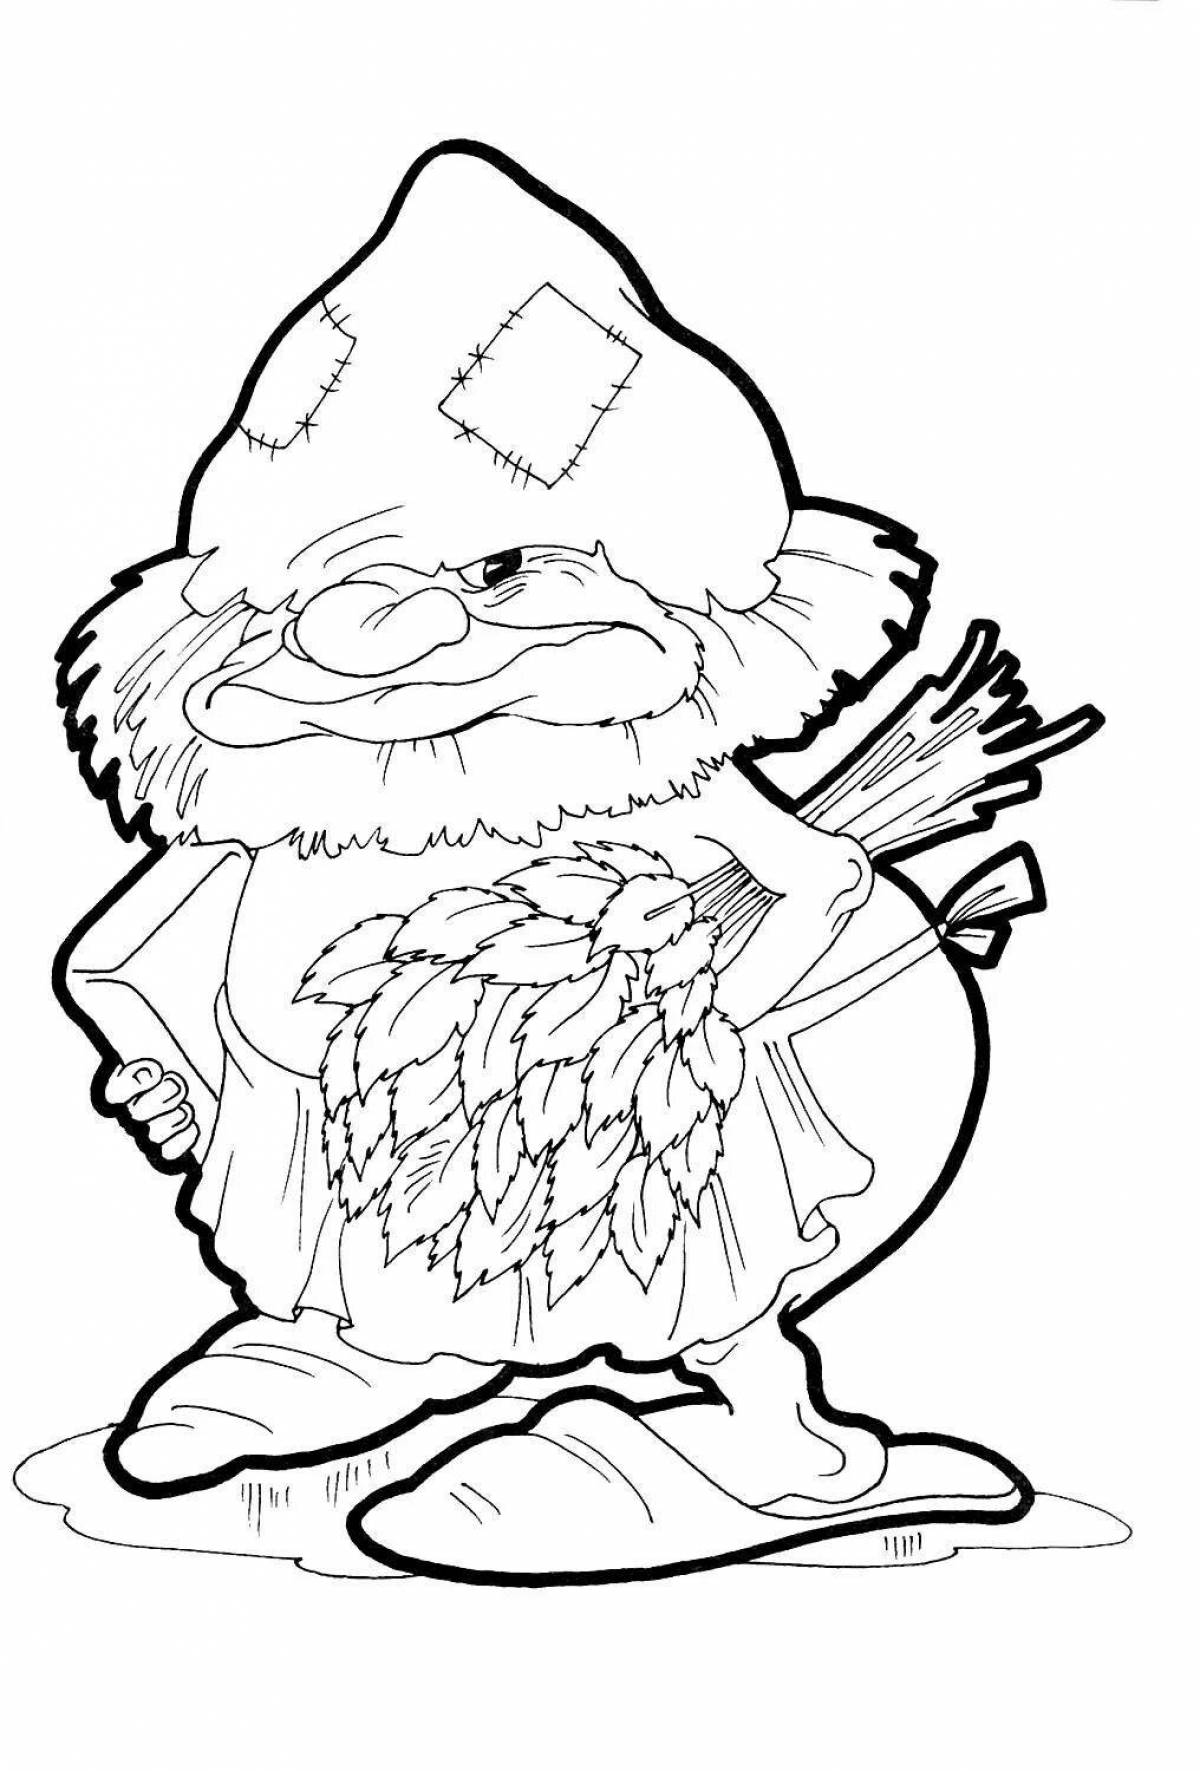 Glowing Goblin Coloring Page for Beginners